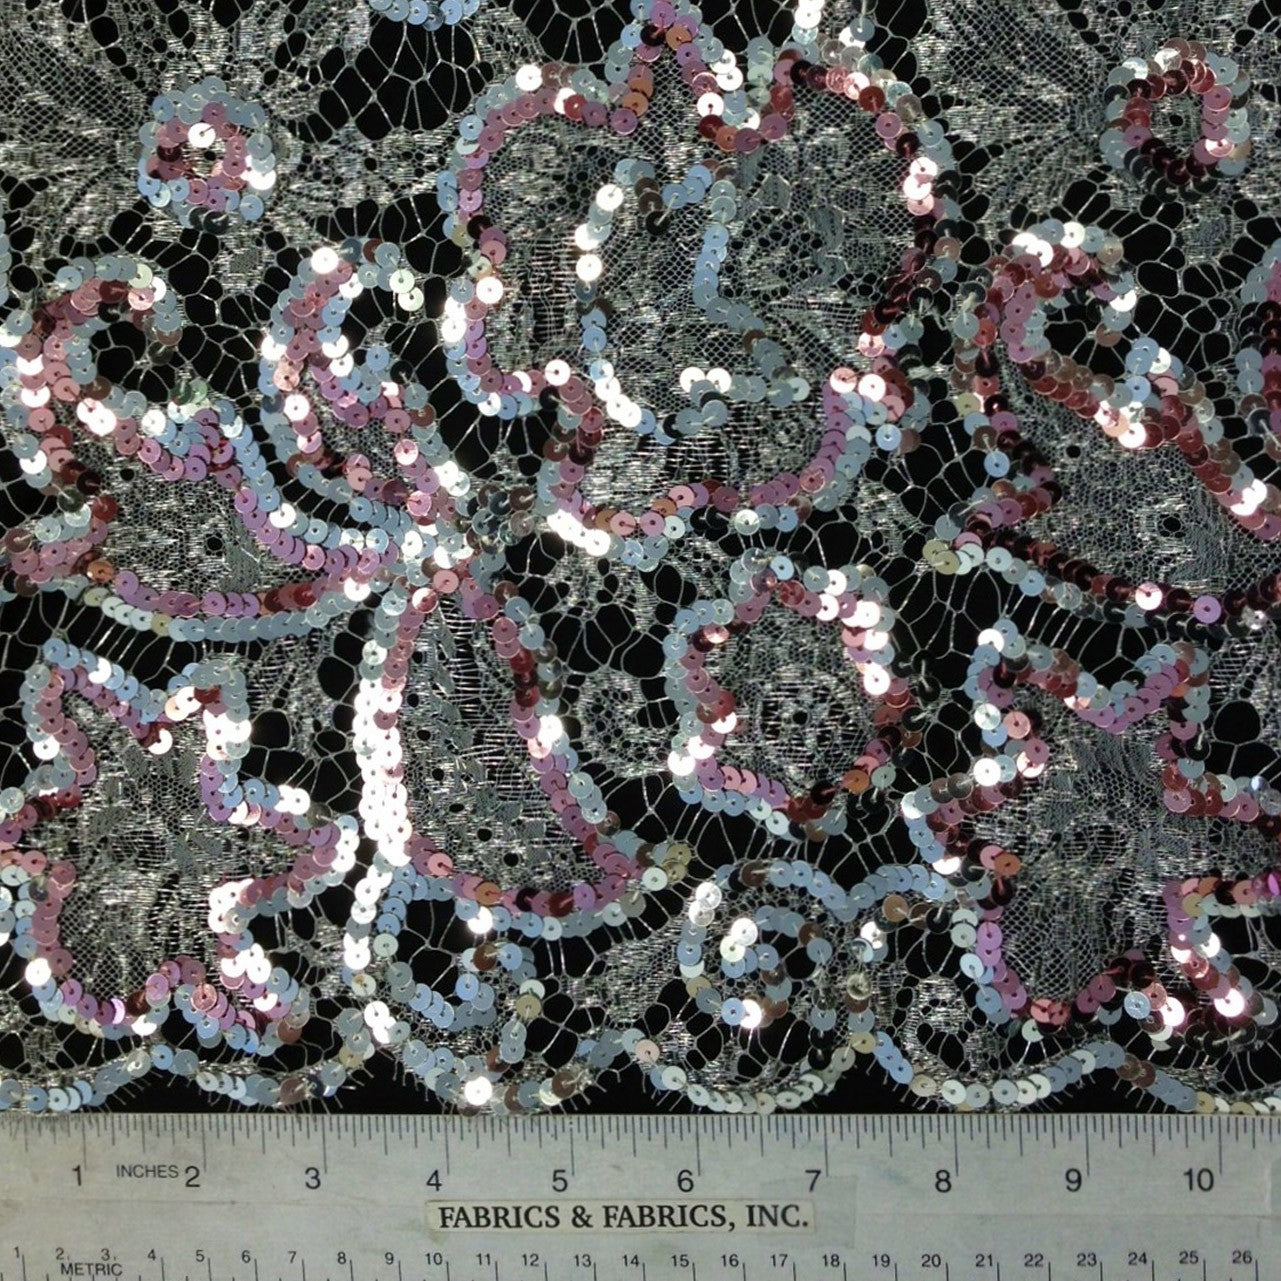 Metallic Beaded Chantilly Lace - Silver/Pink